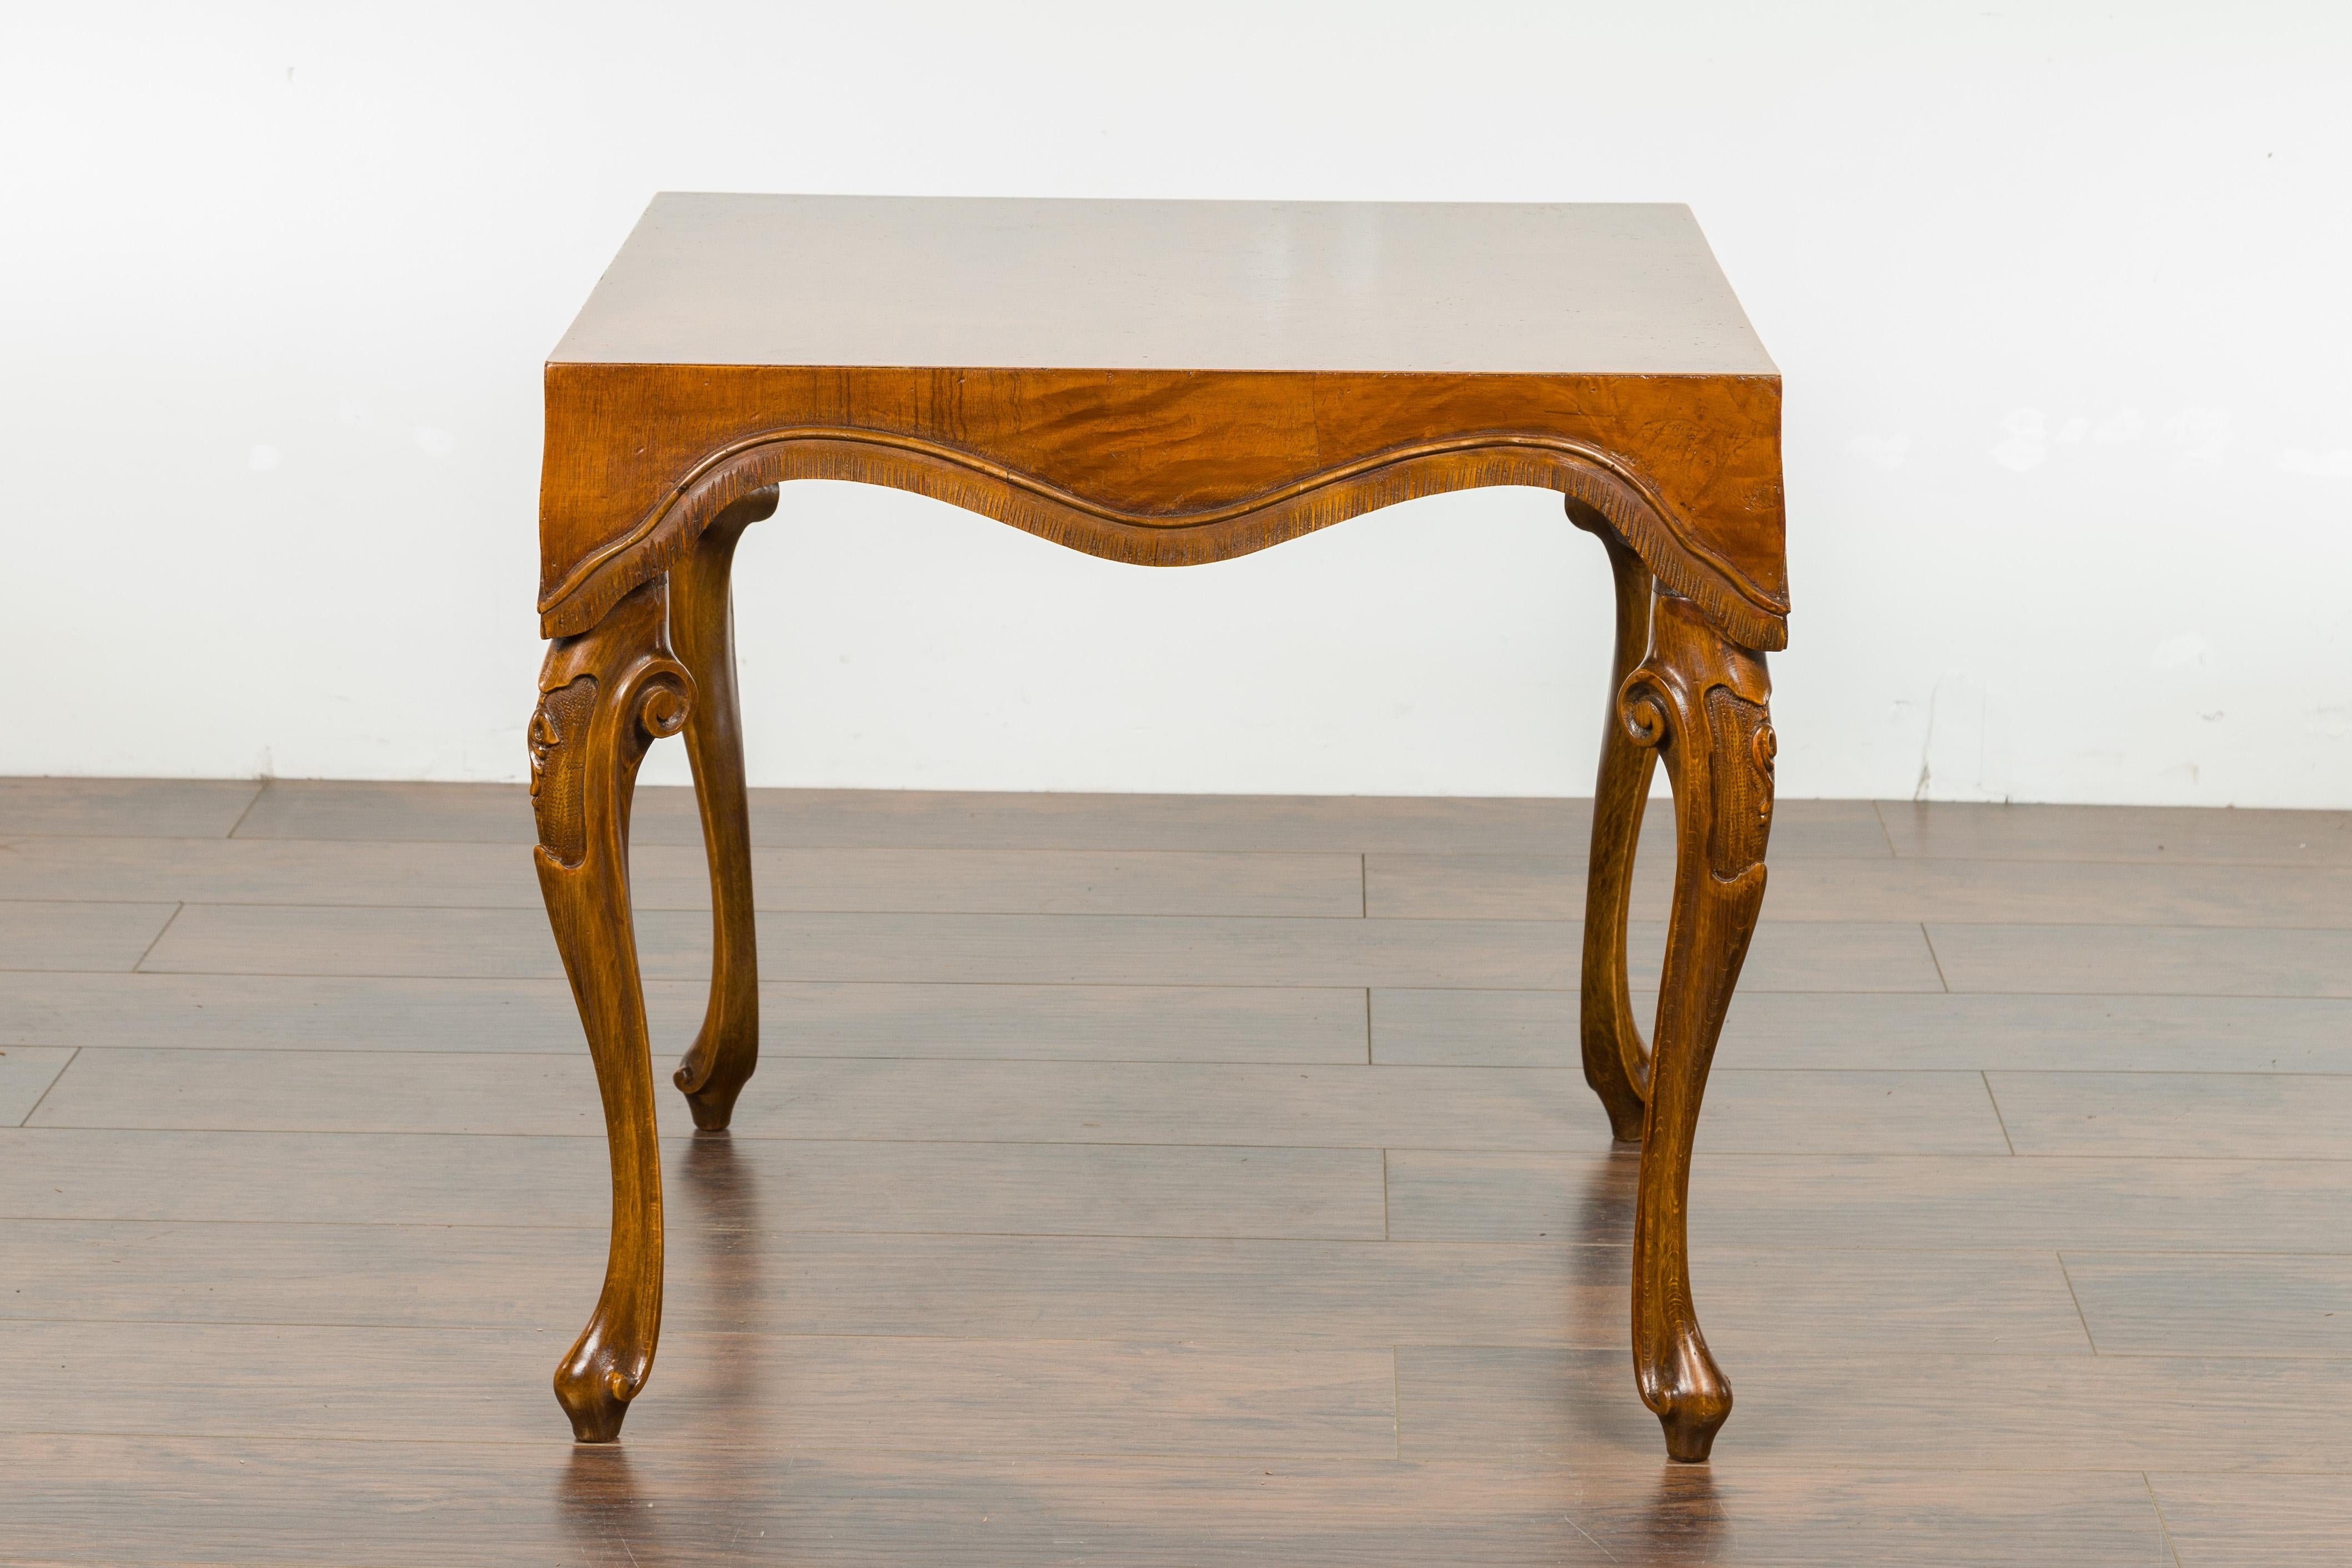 Italian Rococo Style Midcentury Walnut and Olive Wood Table with Cabriole Legs For Sale 6